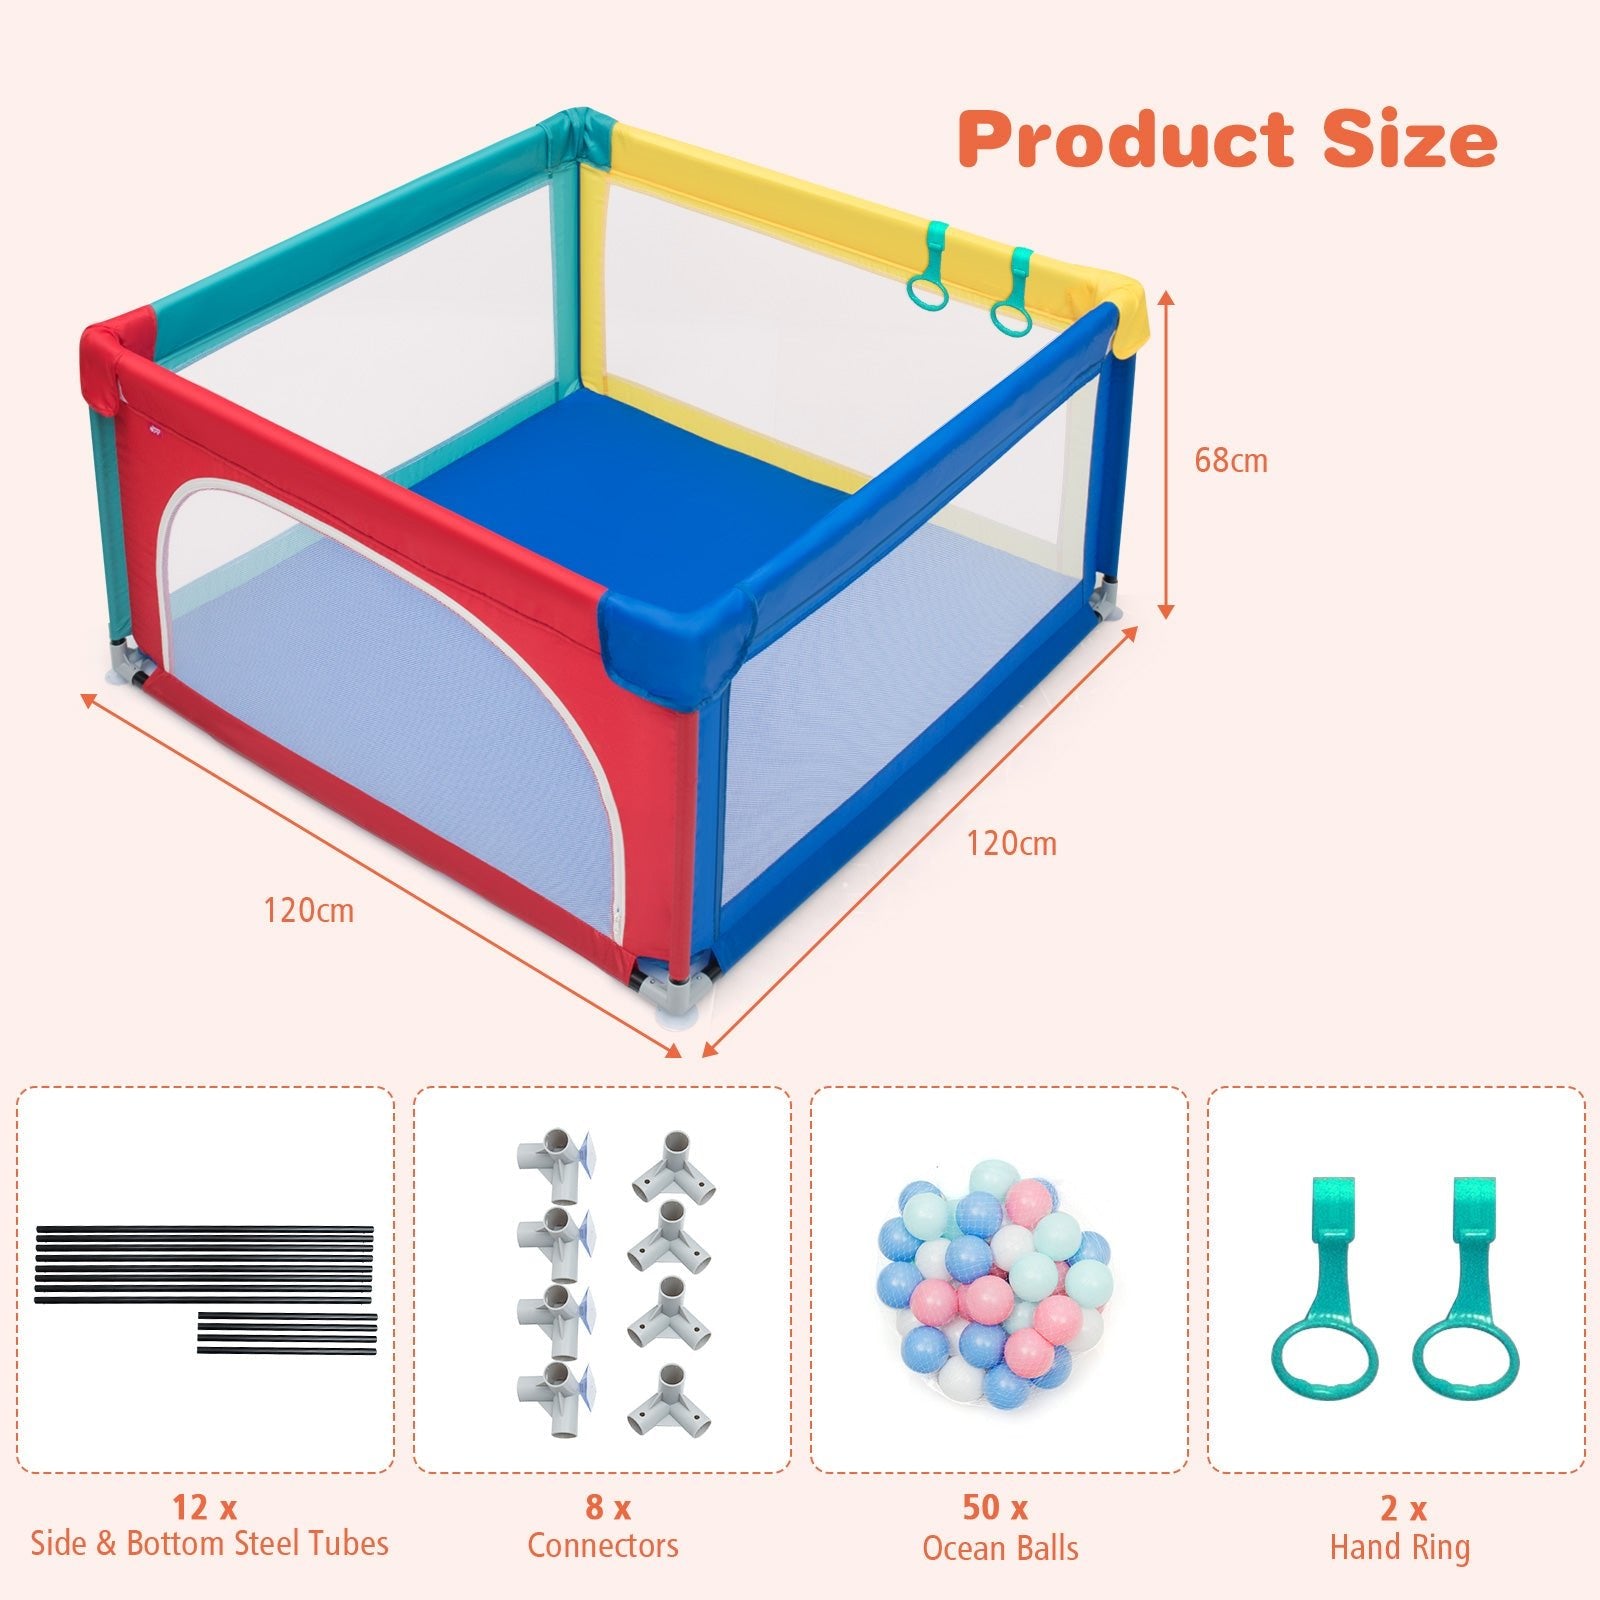 Explore Fun with the Multi-Color Baby Playpen and Ocean Balls